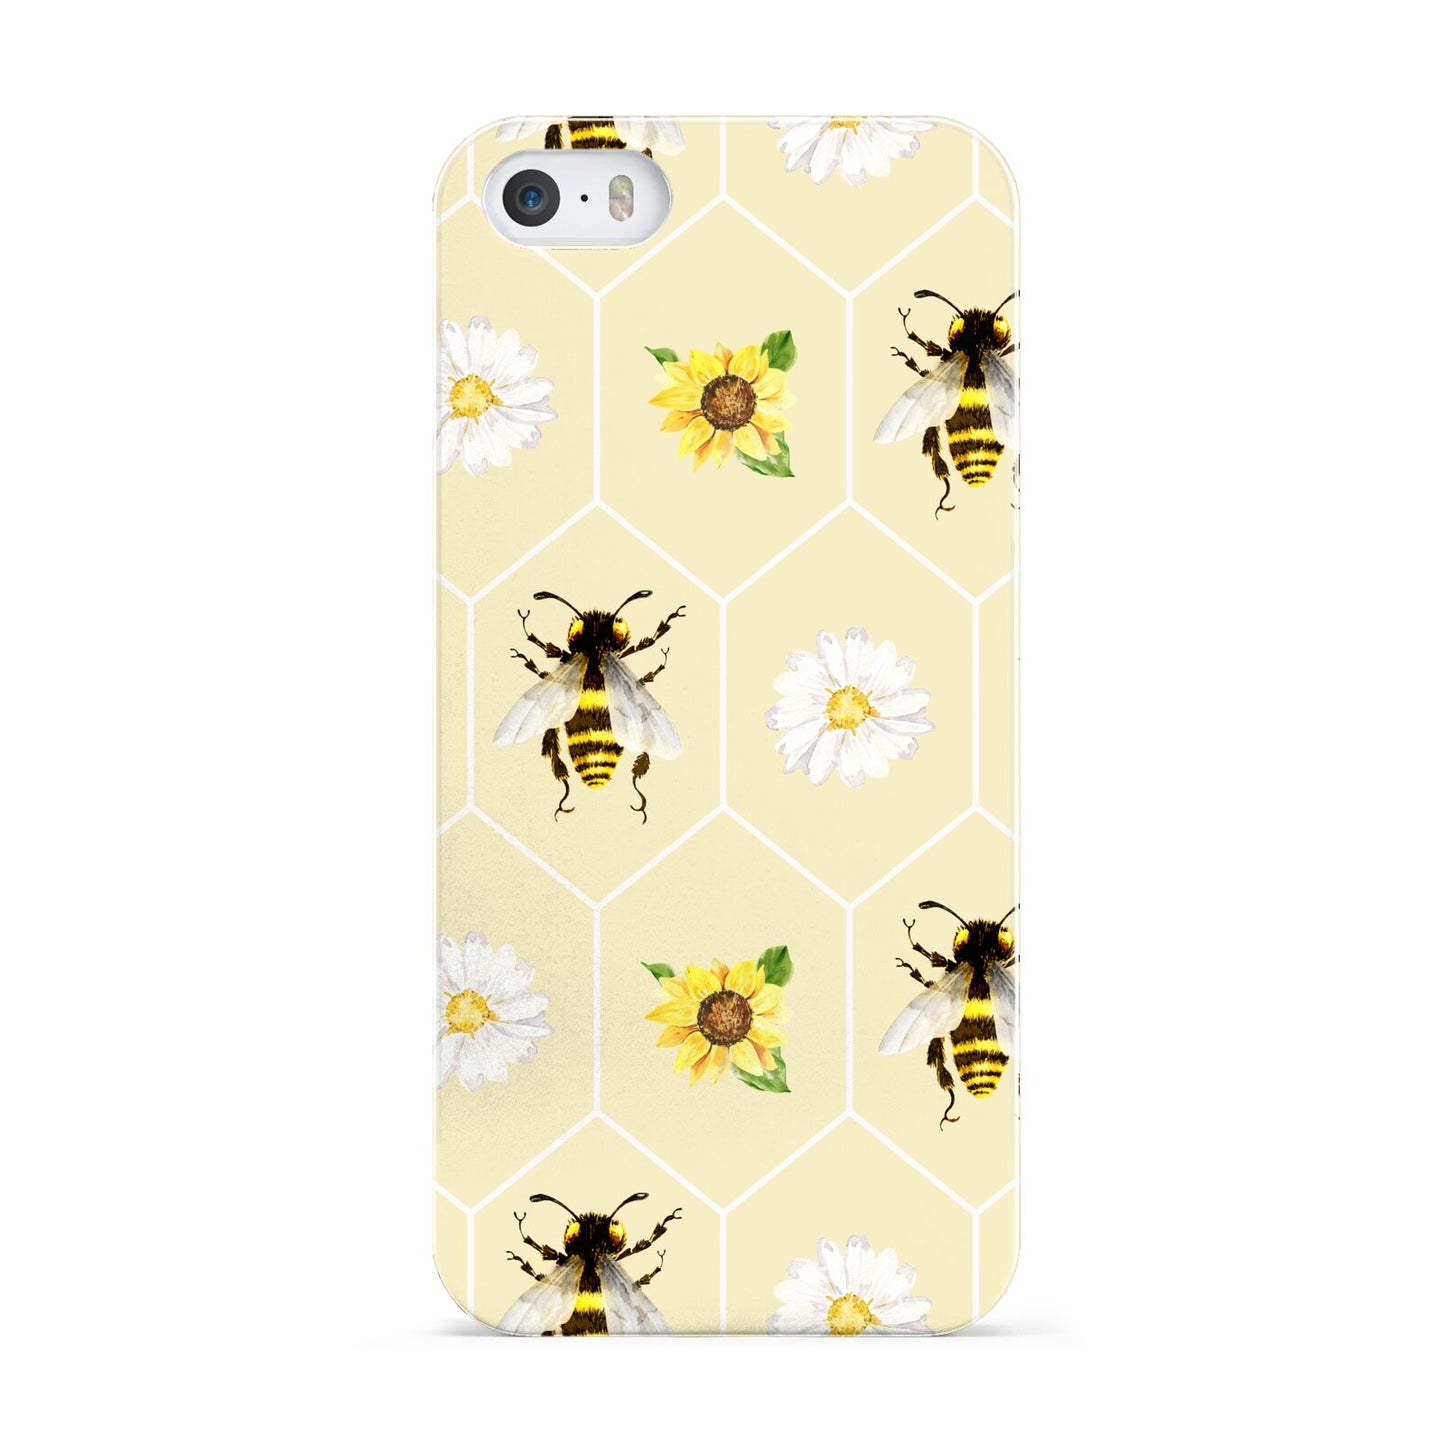 Daisies Bees and Sunflowers Apple iPhone 5 Case